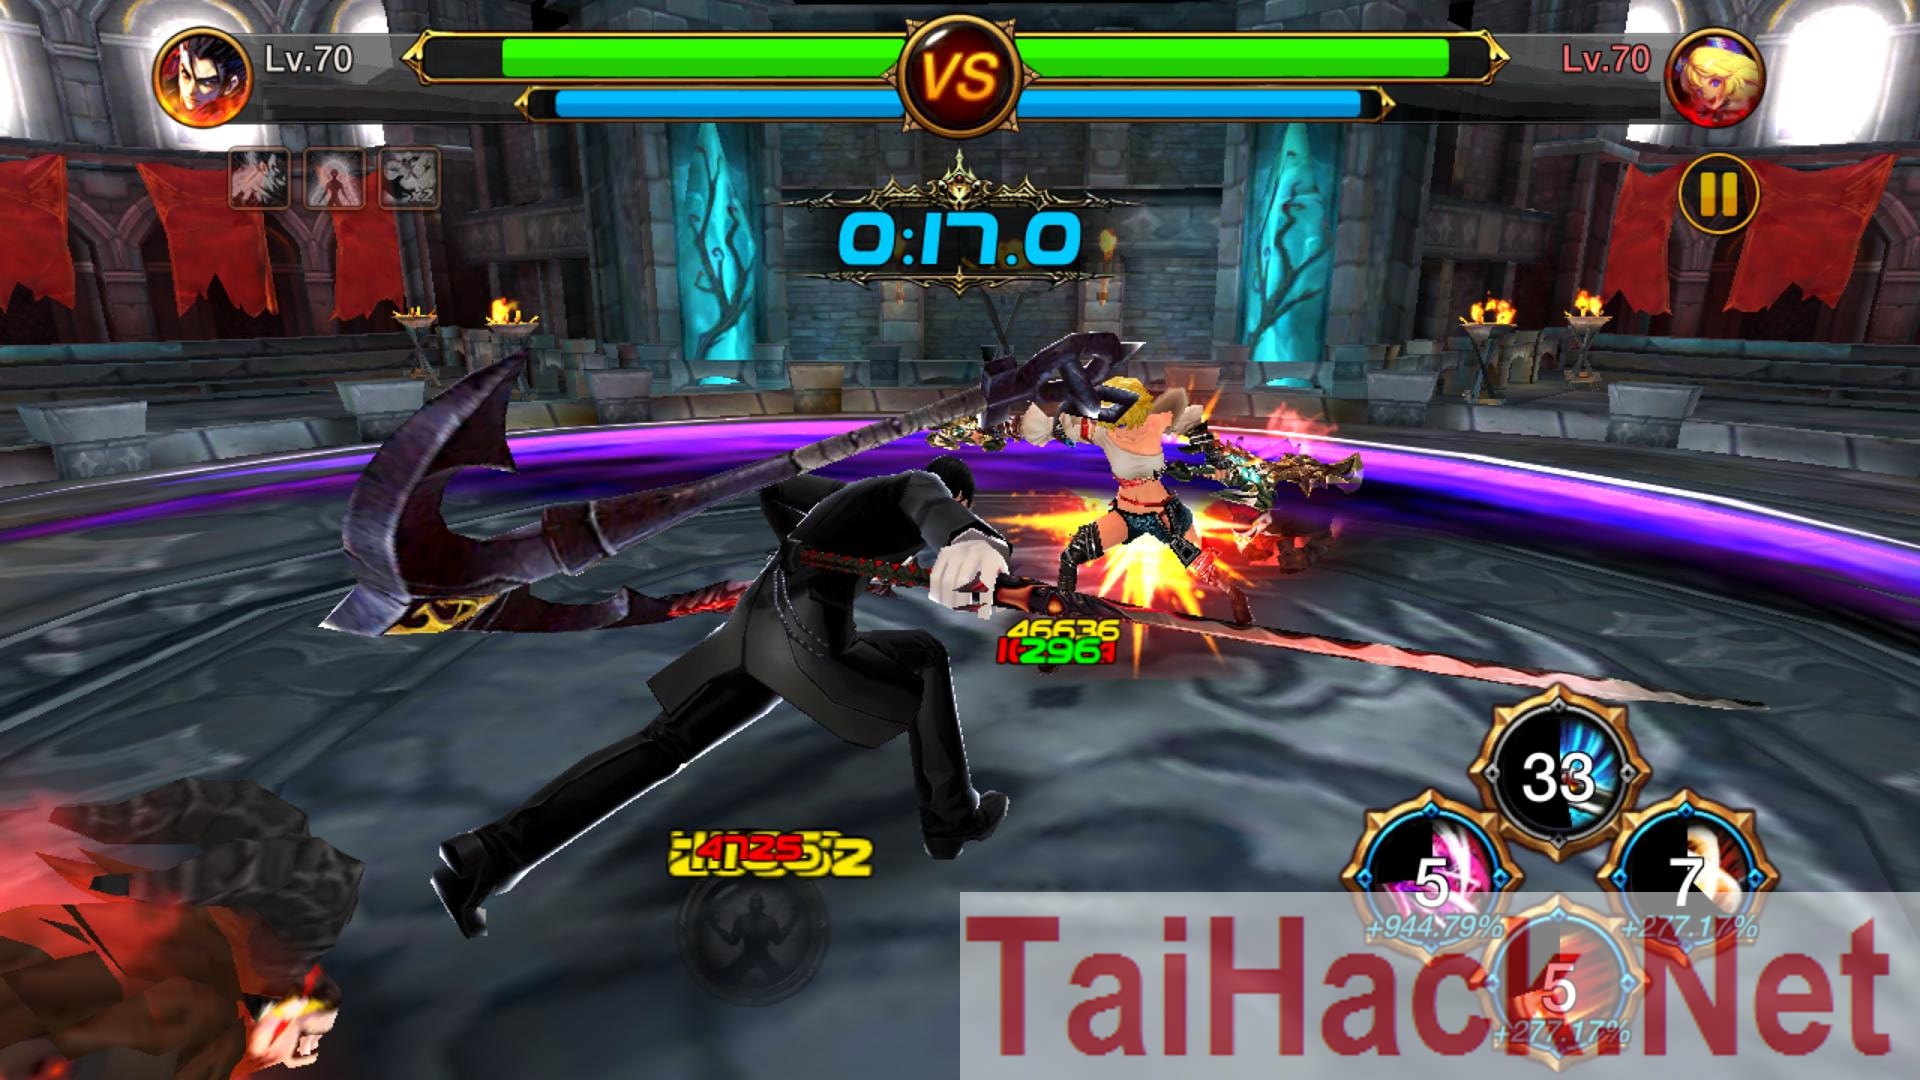 ownload Hack New Version - Kritika: The White Knights Hack Mod for ANDROID. This is an action role-playing game, you will become a knight to destroy the wicked with many weapons and magic equipped in this hack like Added Character Skills and many other features await you. Update the latest hack version at TaiHack.Net. Download Game MOD APK Kritika: The White Knights Hack Mod for ANDROID Free New Update.